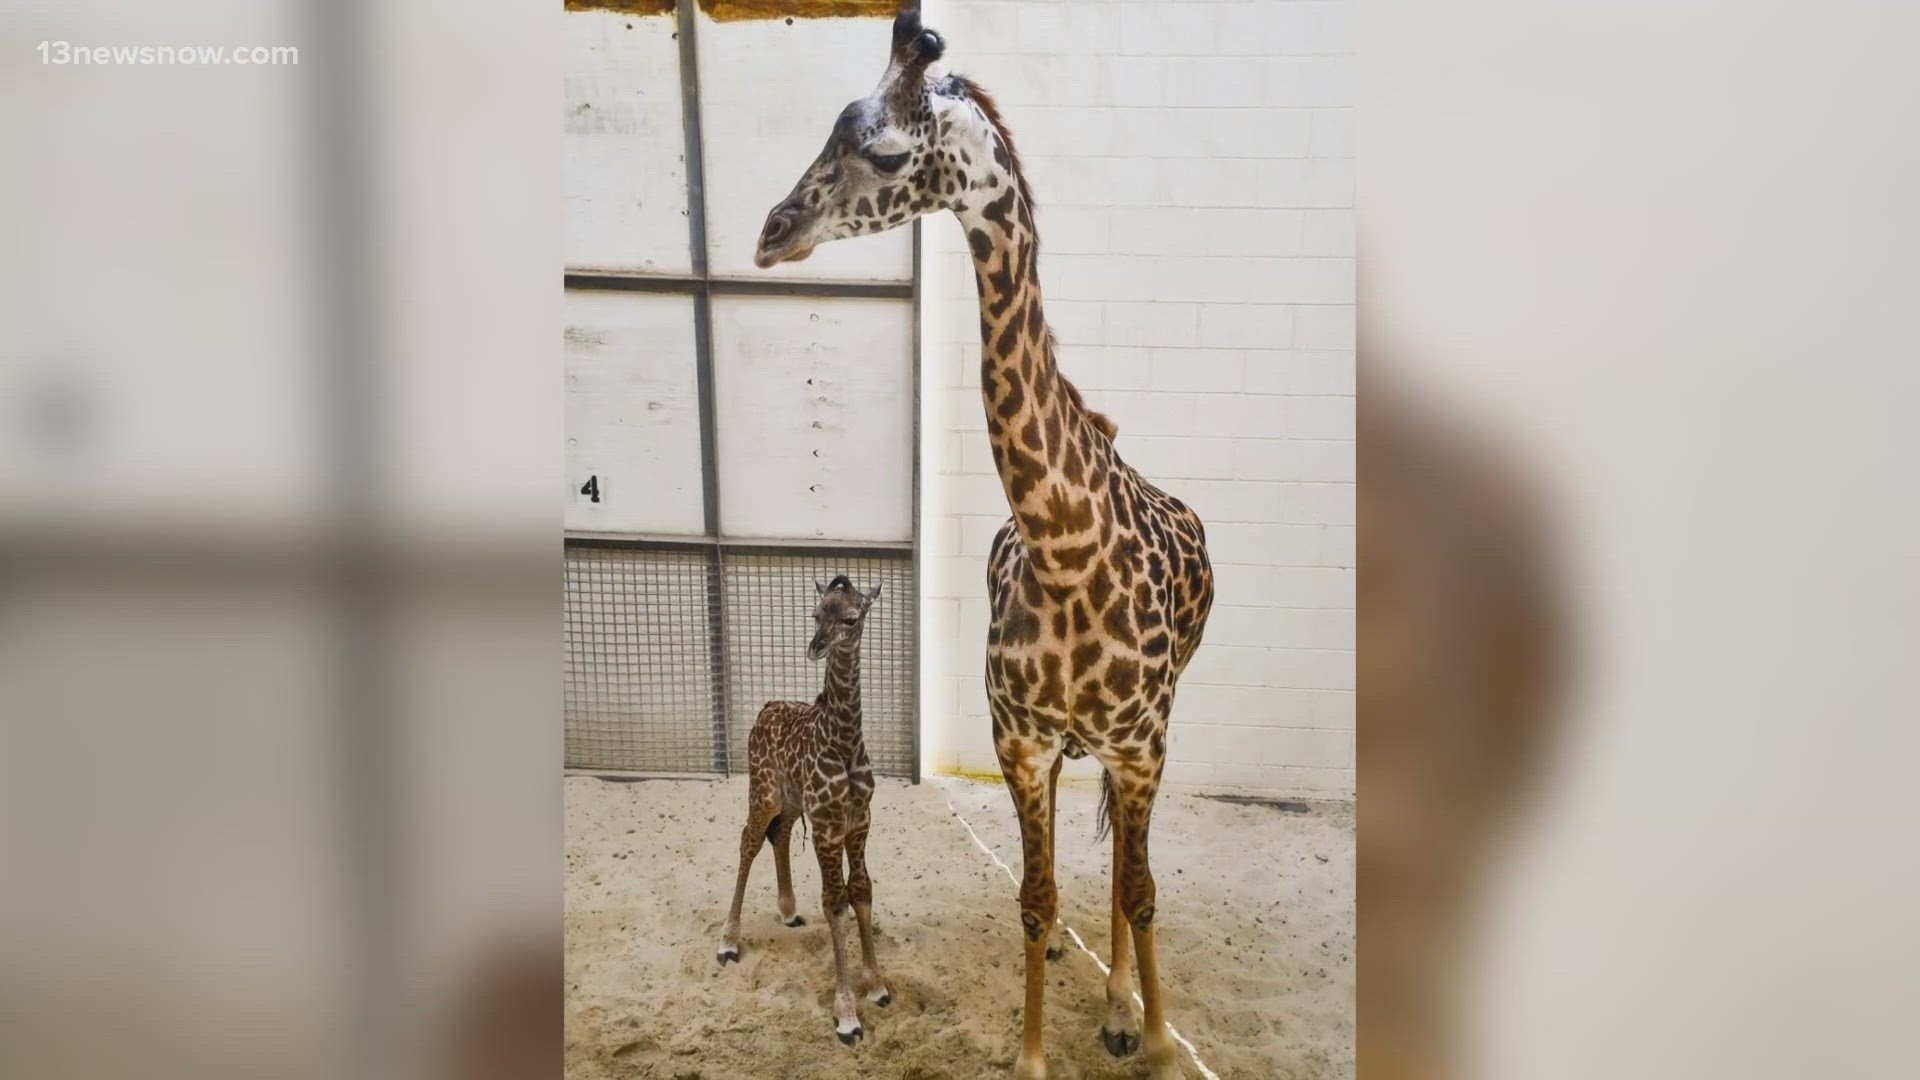 Henry was born on at Norfolk's Virginia Zoo on Thursday.